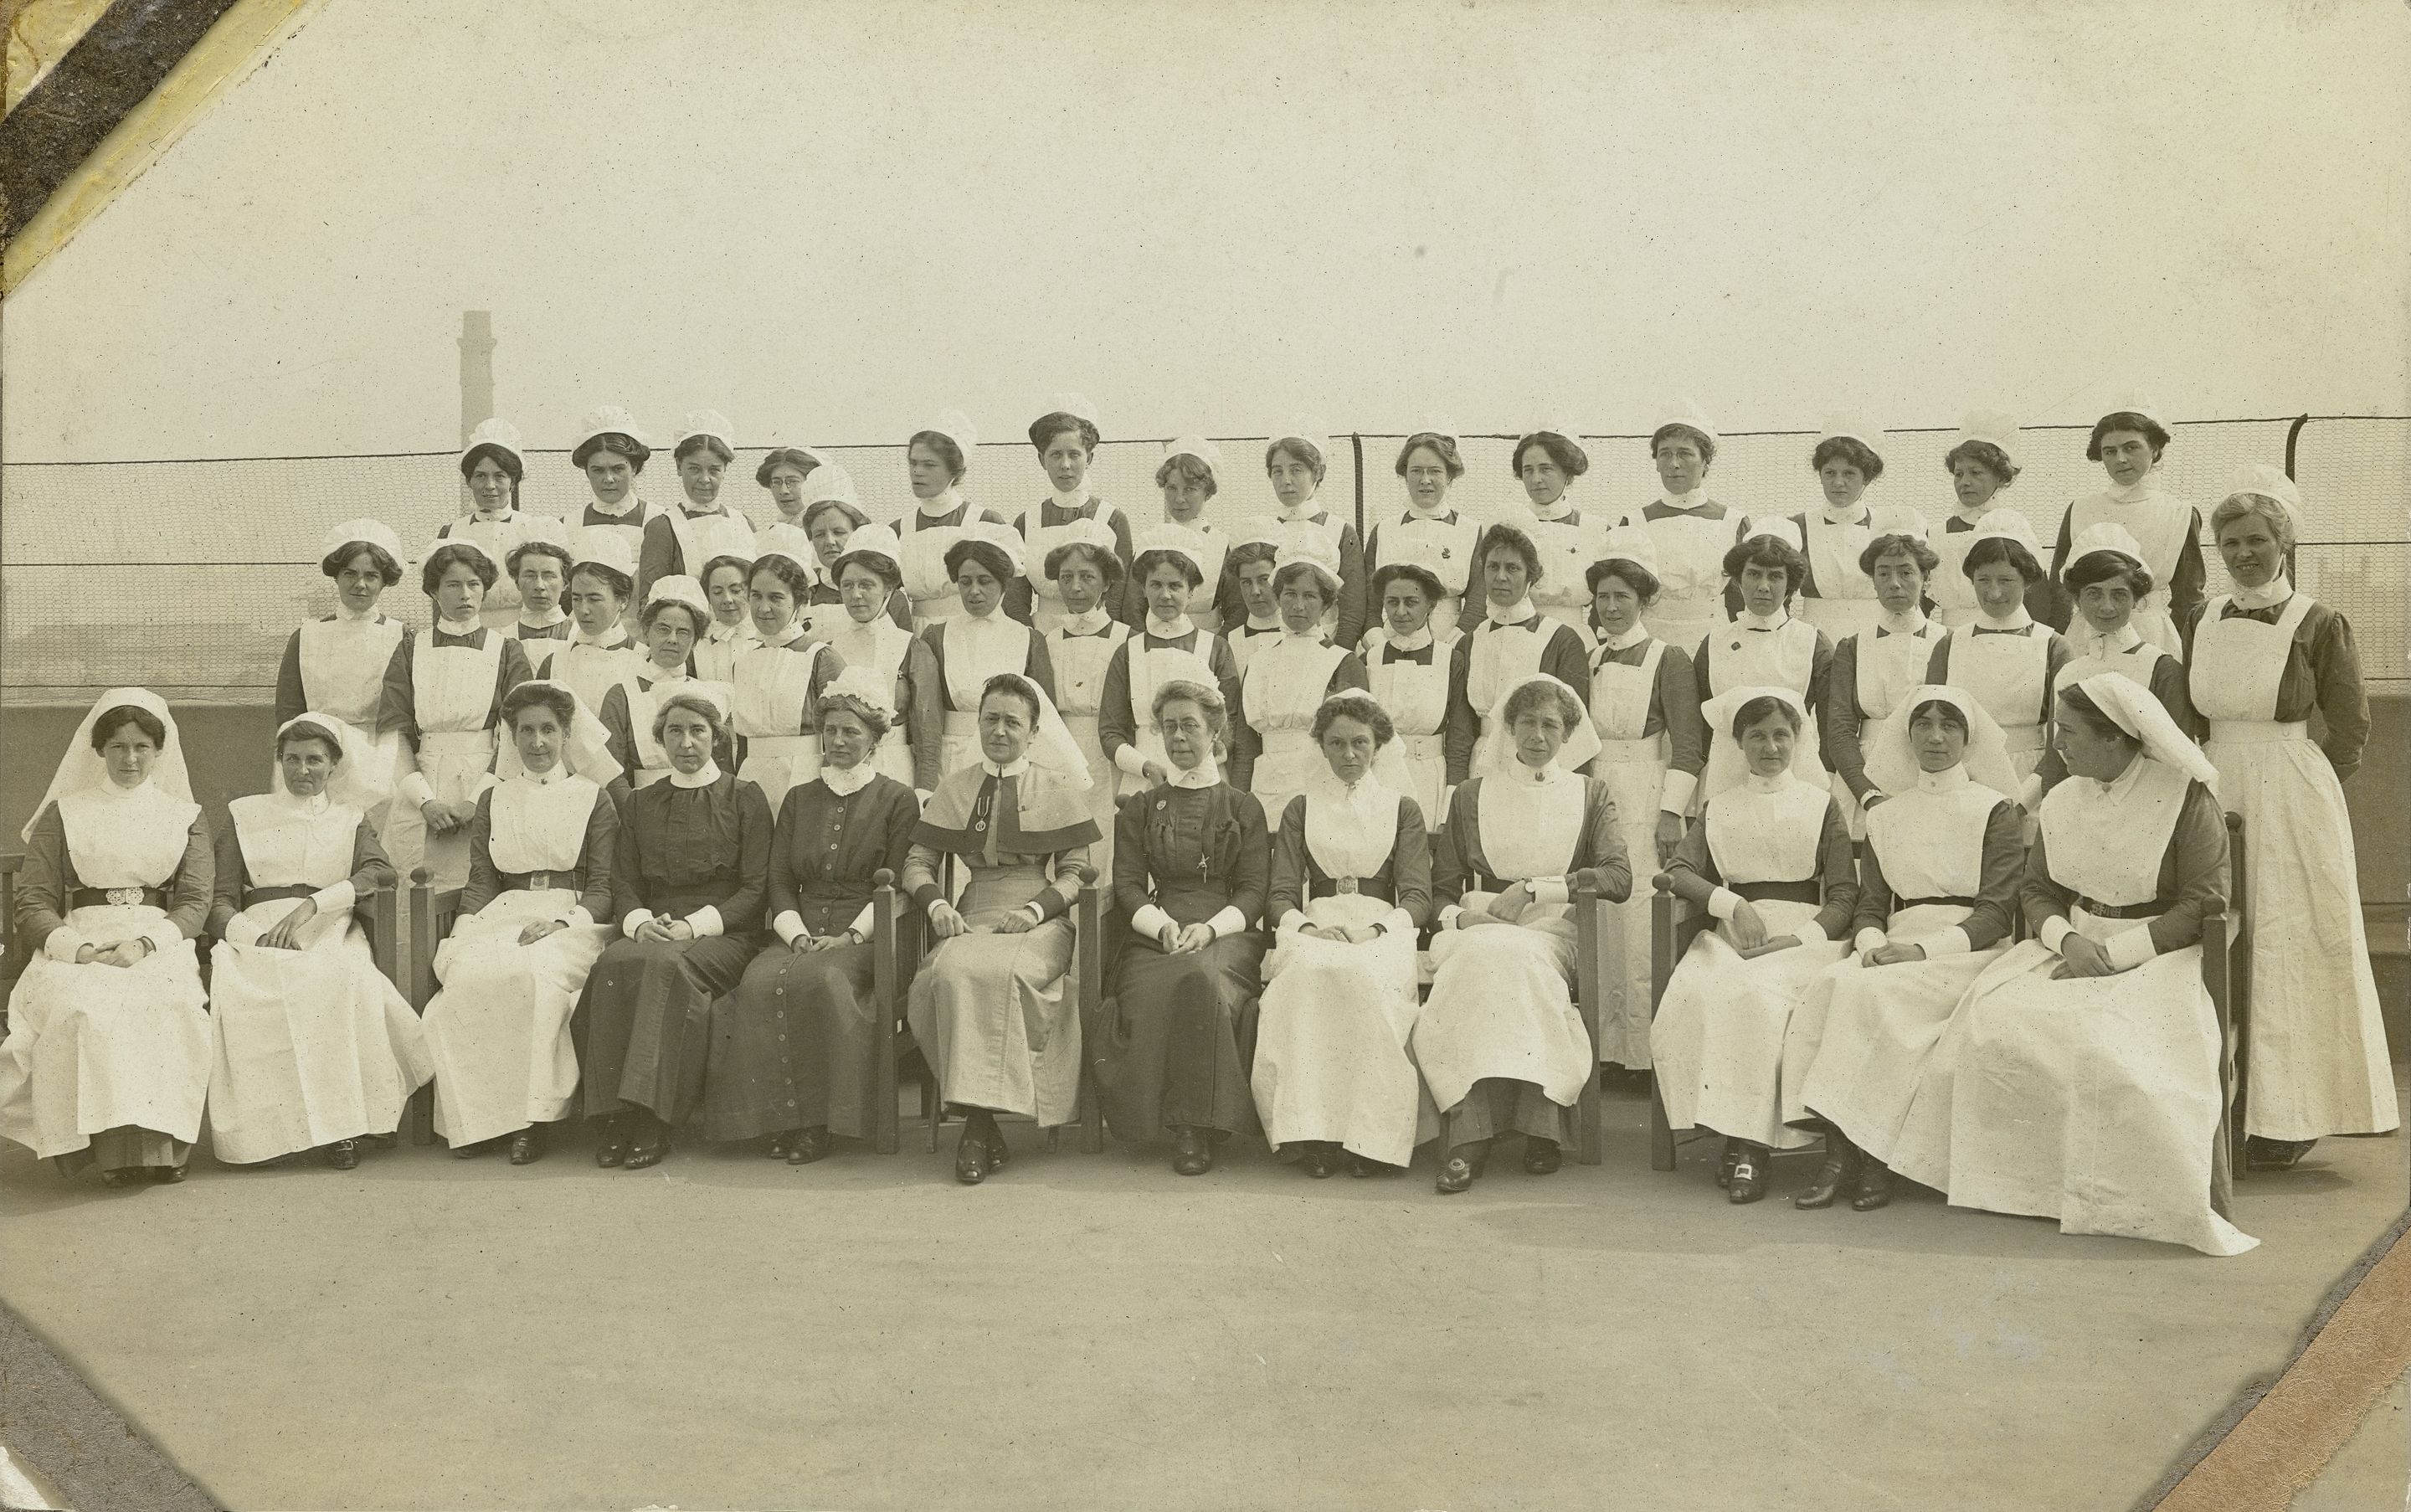 "The Matron, Floor Sisters. Ward Sisters all qualified Nurses and paid as such". Credit: The RAMC Muniment Collection in the care of the Wellcome Library Archives & Manuscripts Keywords: World War I. (Image: Wikipedia.)